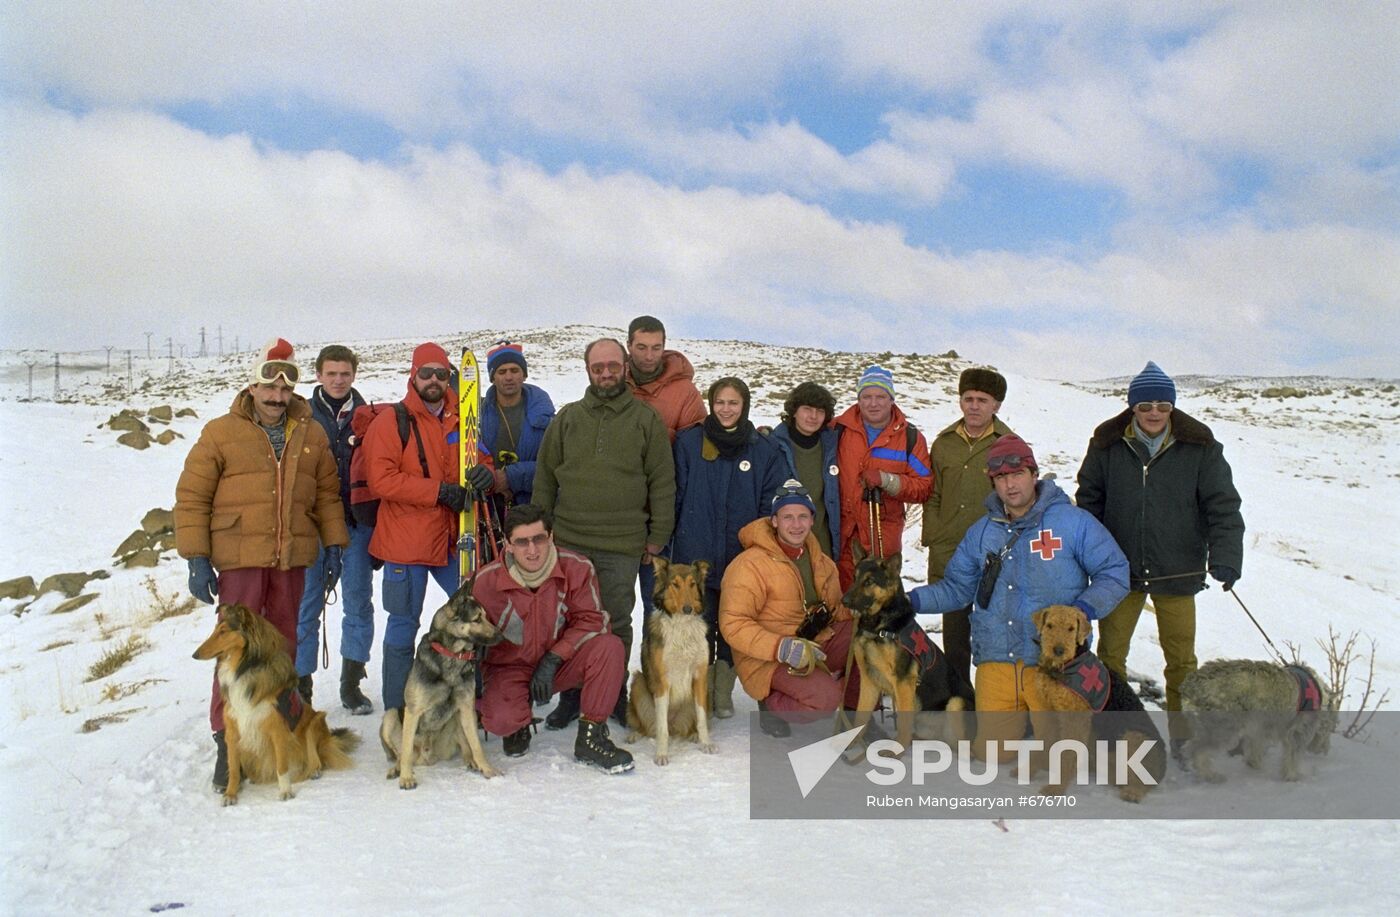 Rescuers with "Spitak" squad on slopes of Aragats in Armenia